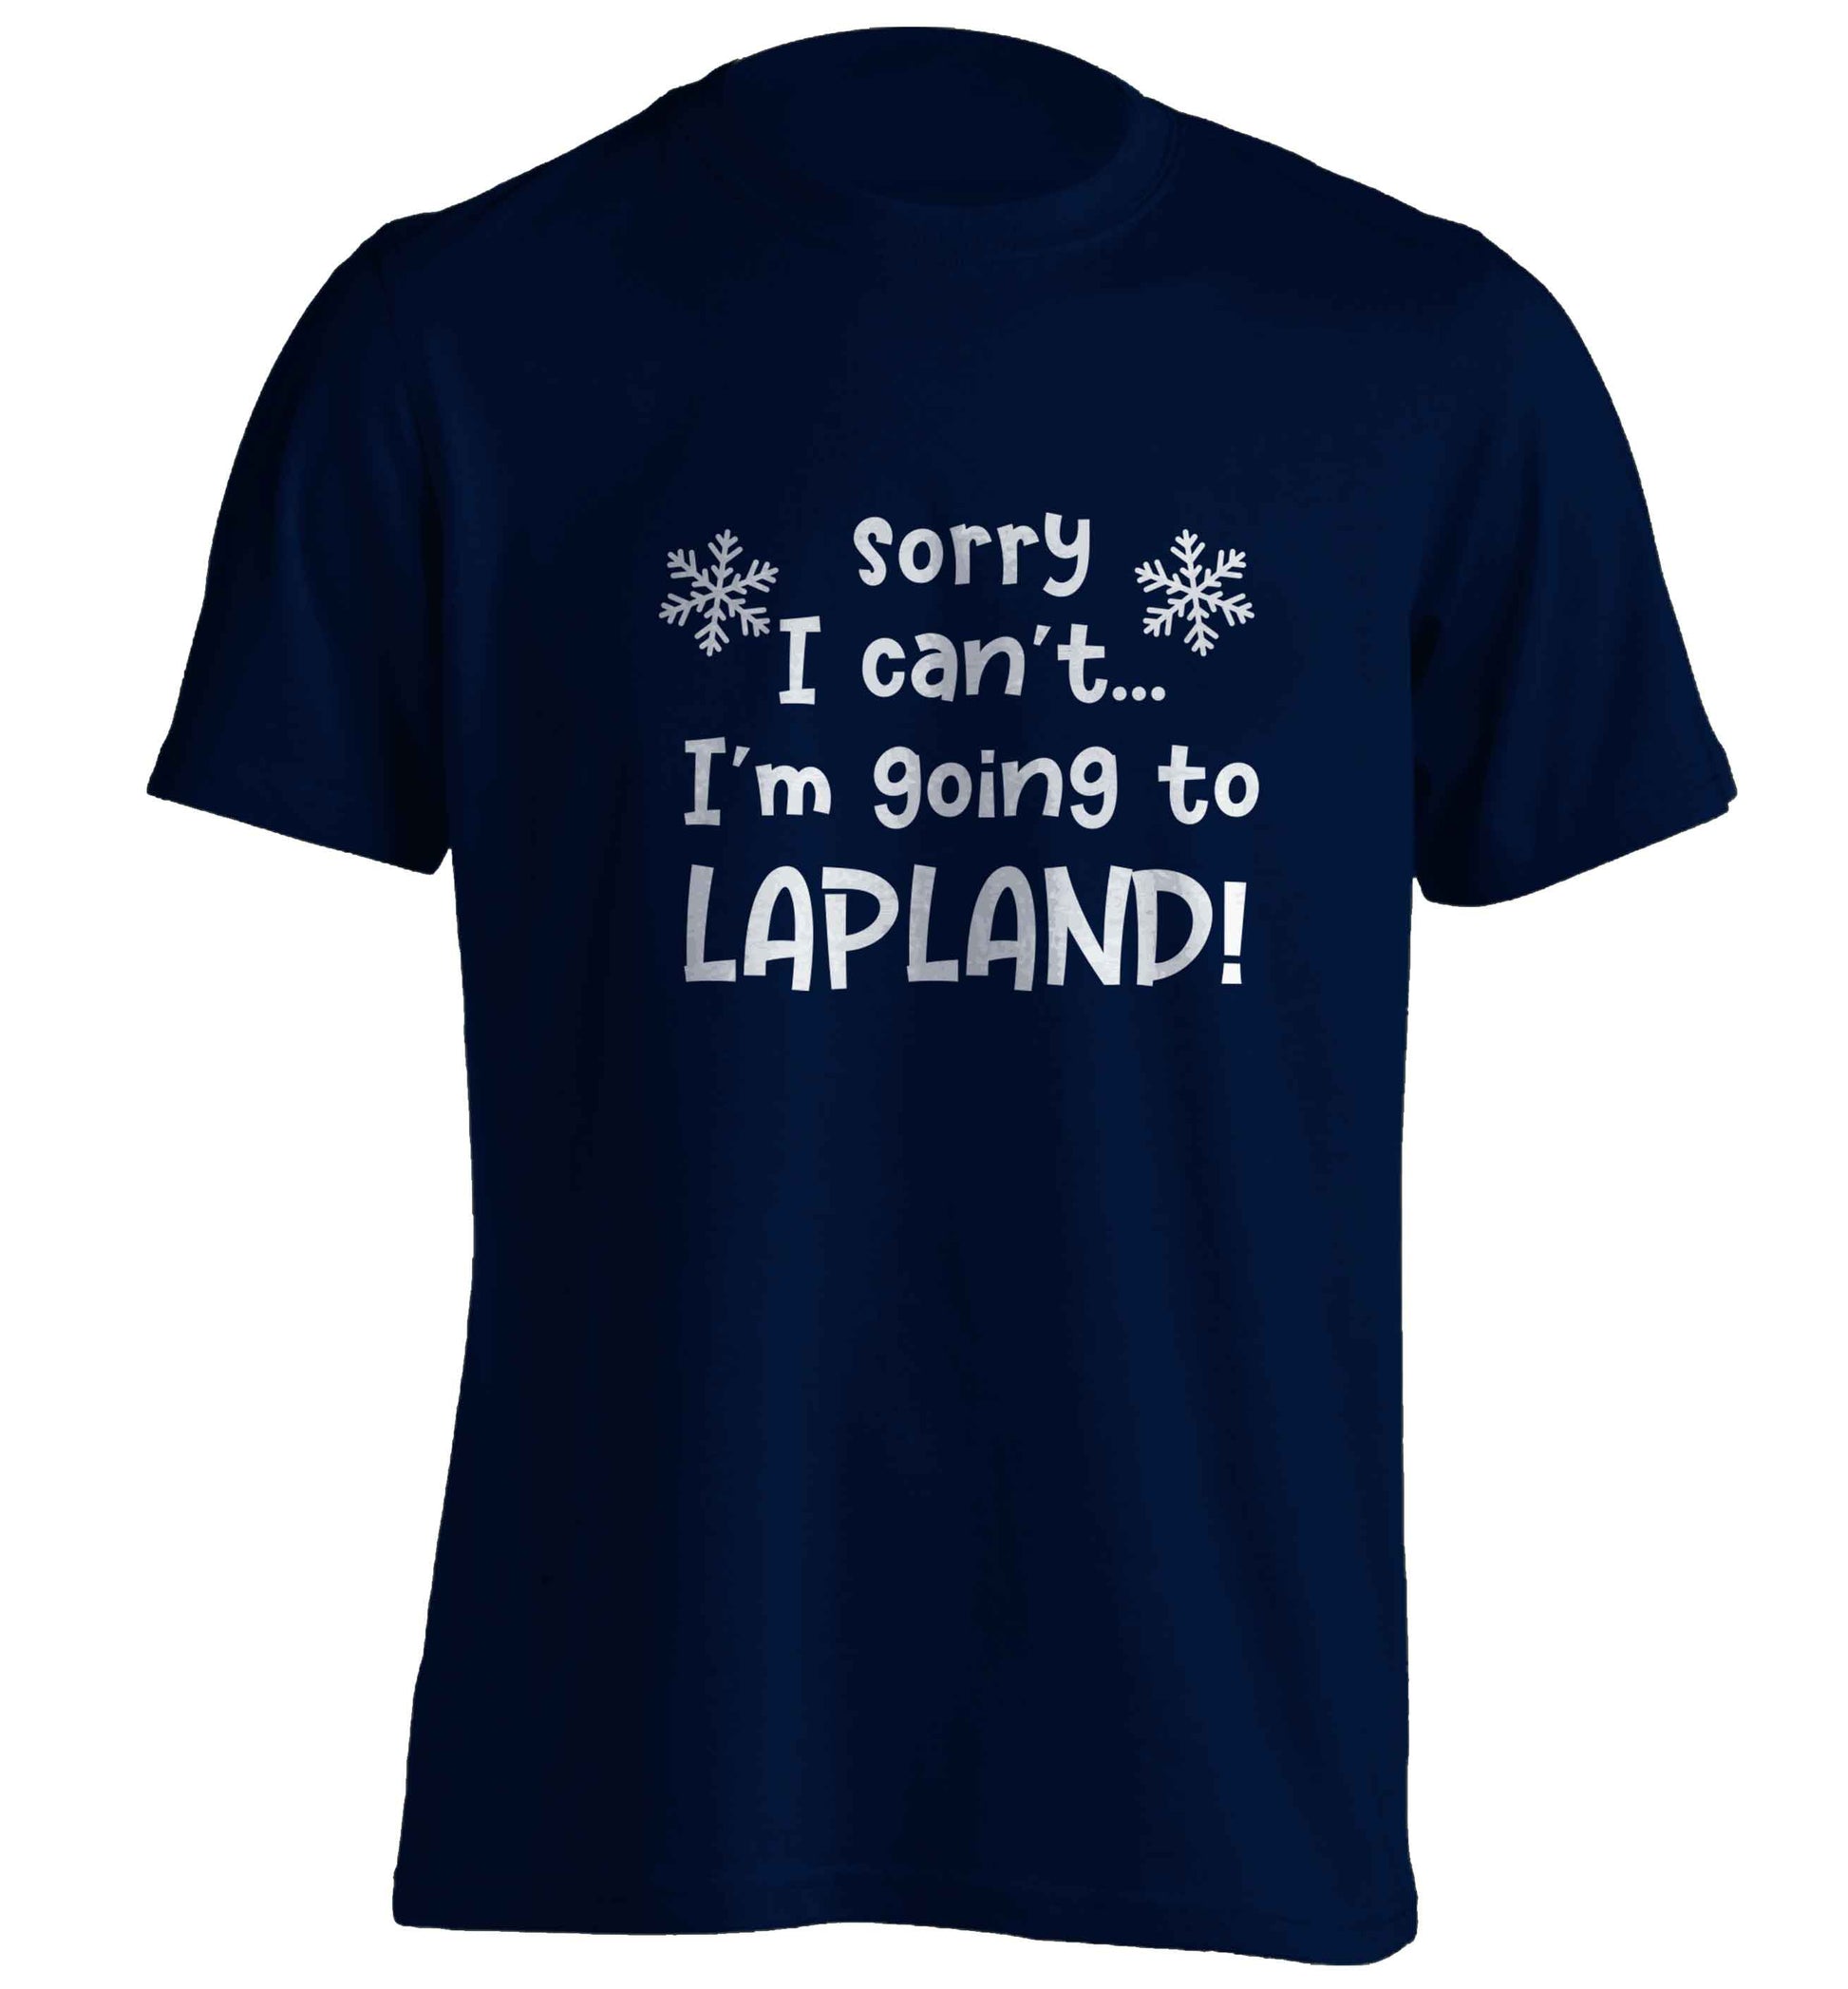 Sorry I can't I'm going to Lapland adults unisex navy Tshirt 2XL